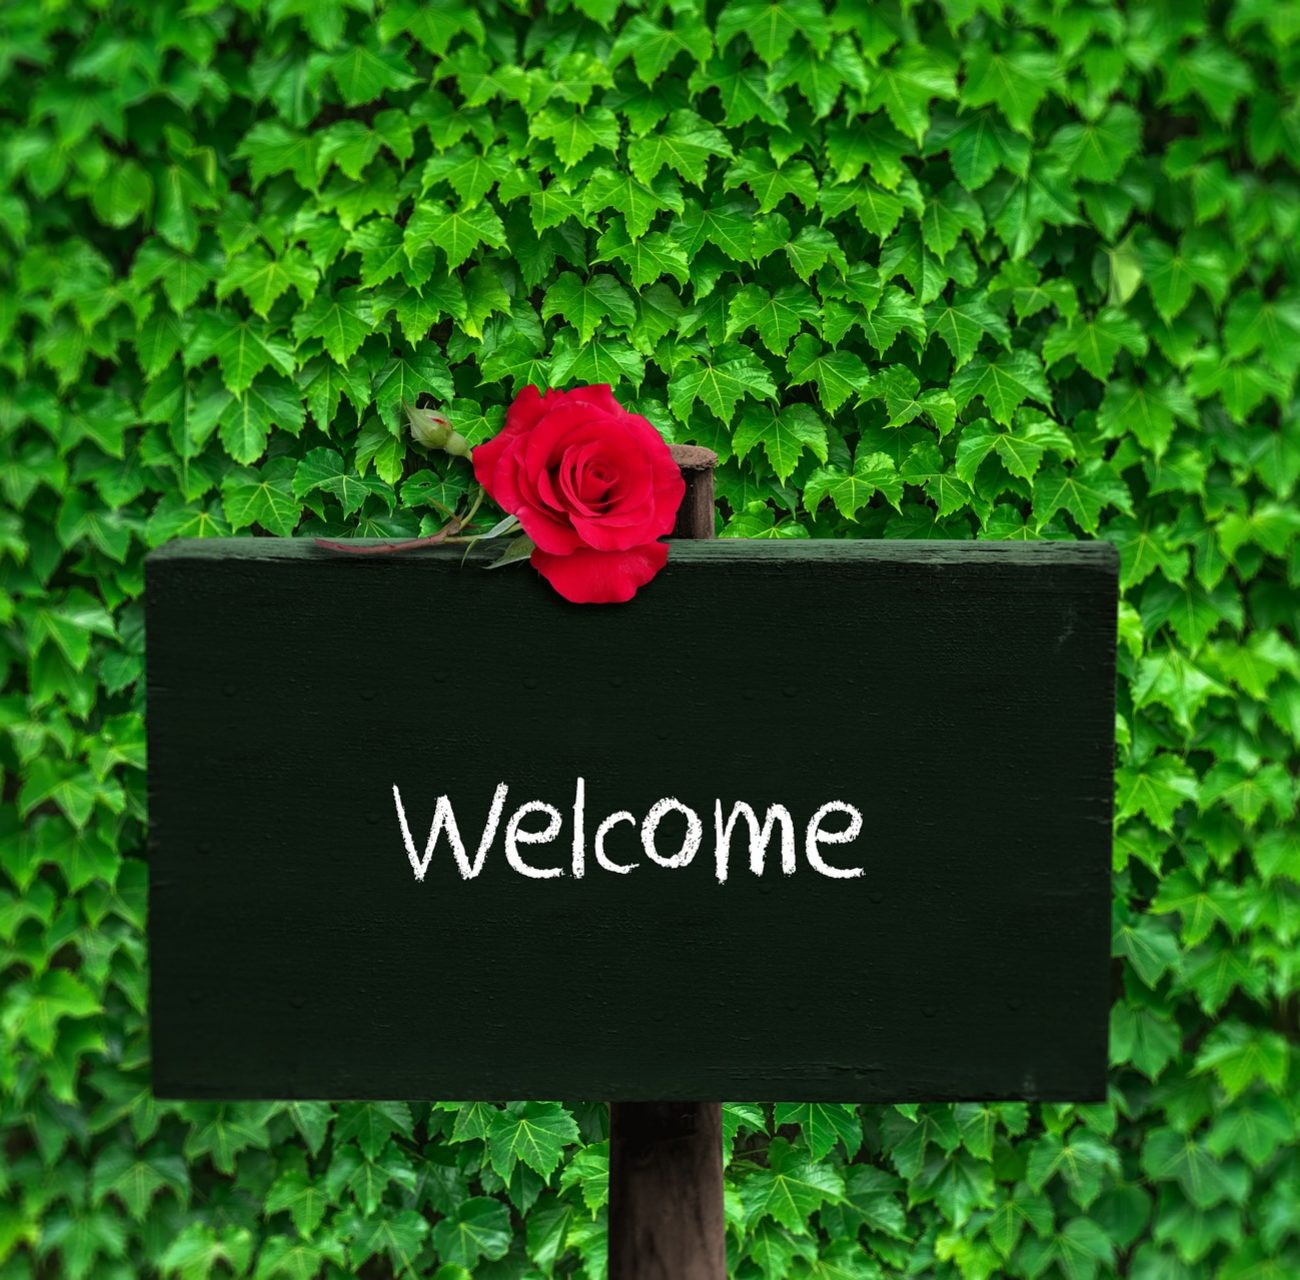 Welcome with red rose and green background